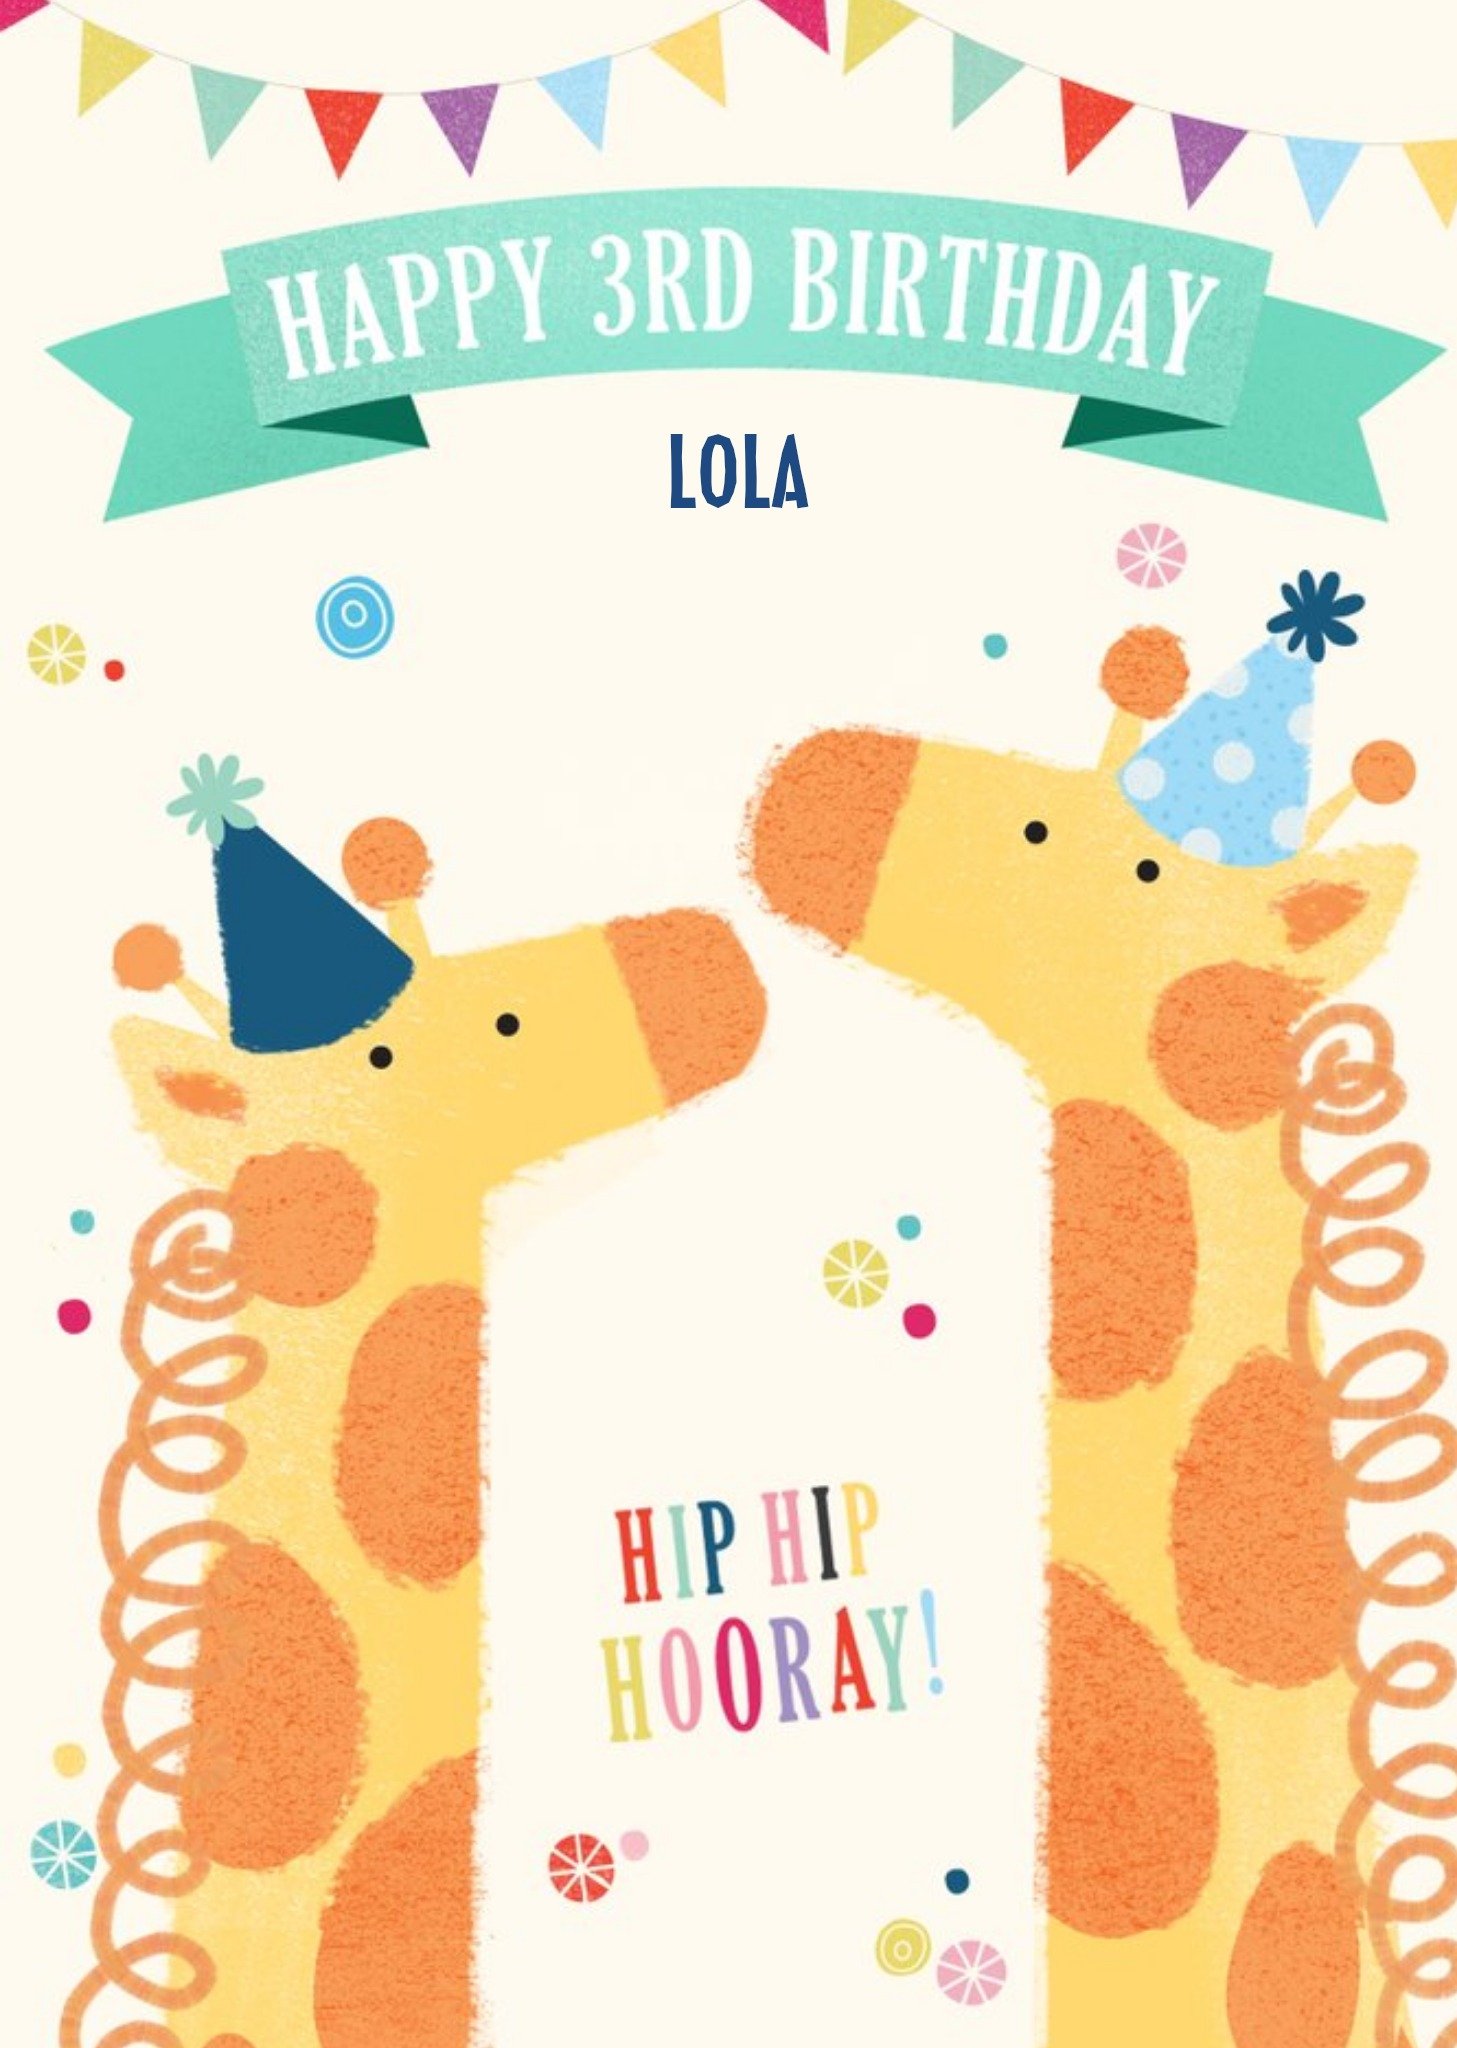 Moonpig Illustration Of A Pair Of Giraffes In Party Hats Third Birthday Card, Large